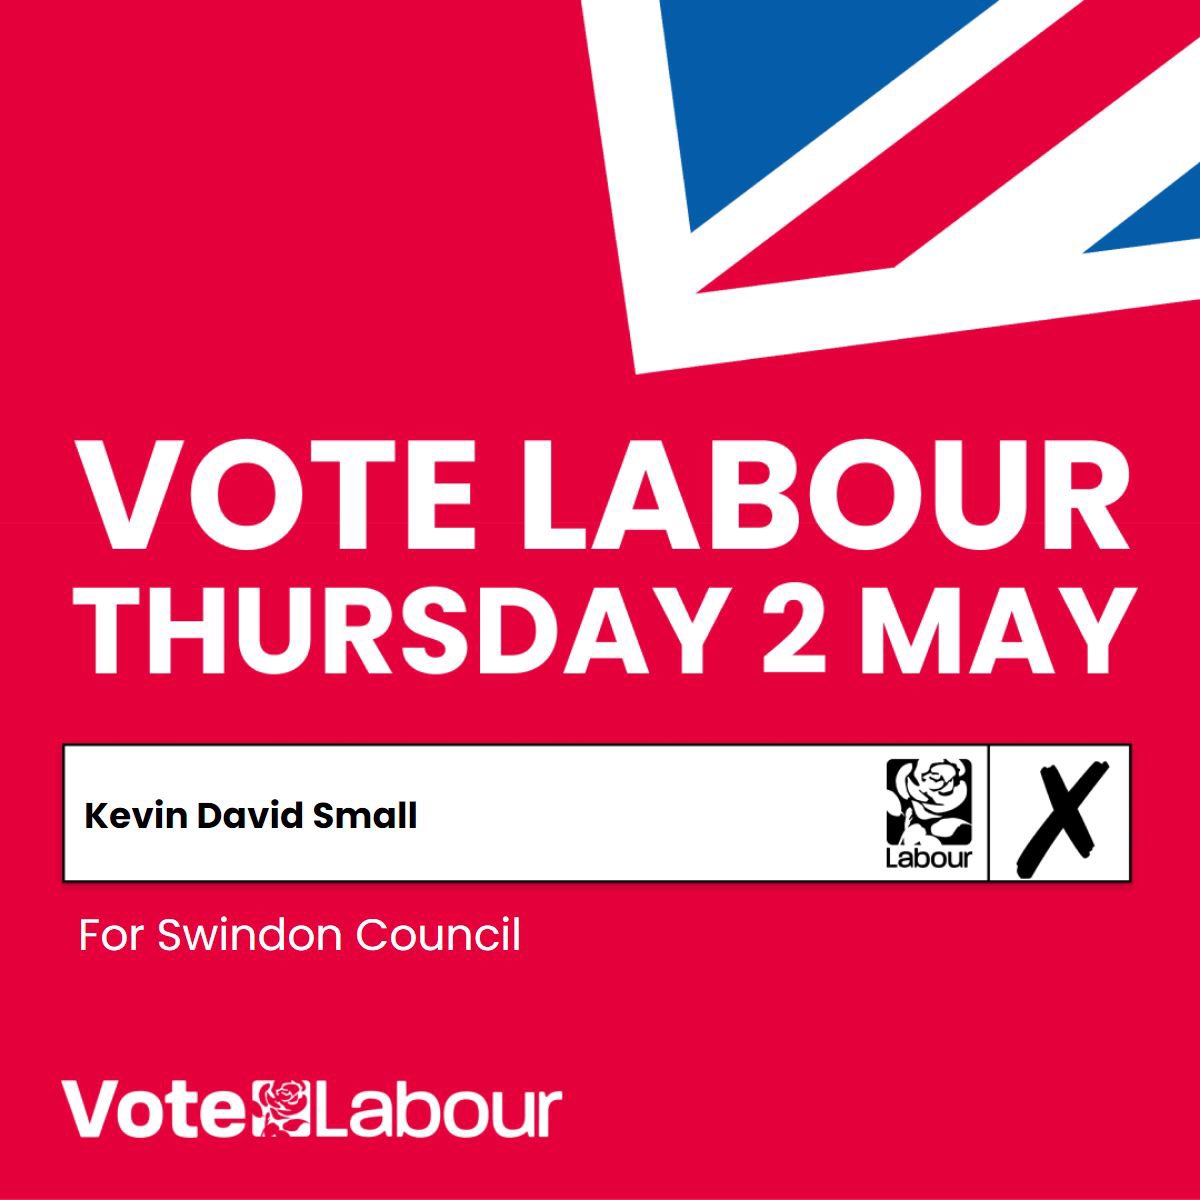 Tomorrow Thursday May 2nd #VoteLabour #VoteSmall #VoteKevinSmall @sn2sam for Swindon Council #BuildingABetterSwindon Also @Stanka4PCC Wiltshire Police & Crime Commissioner #VoteStanka Don't forget your ID 🪪🤔🌹